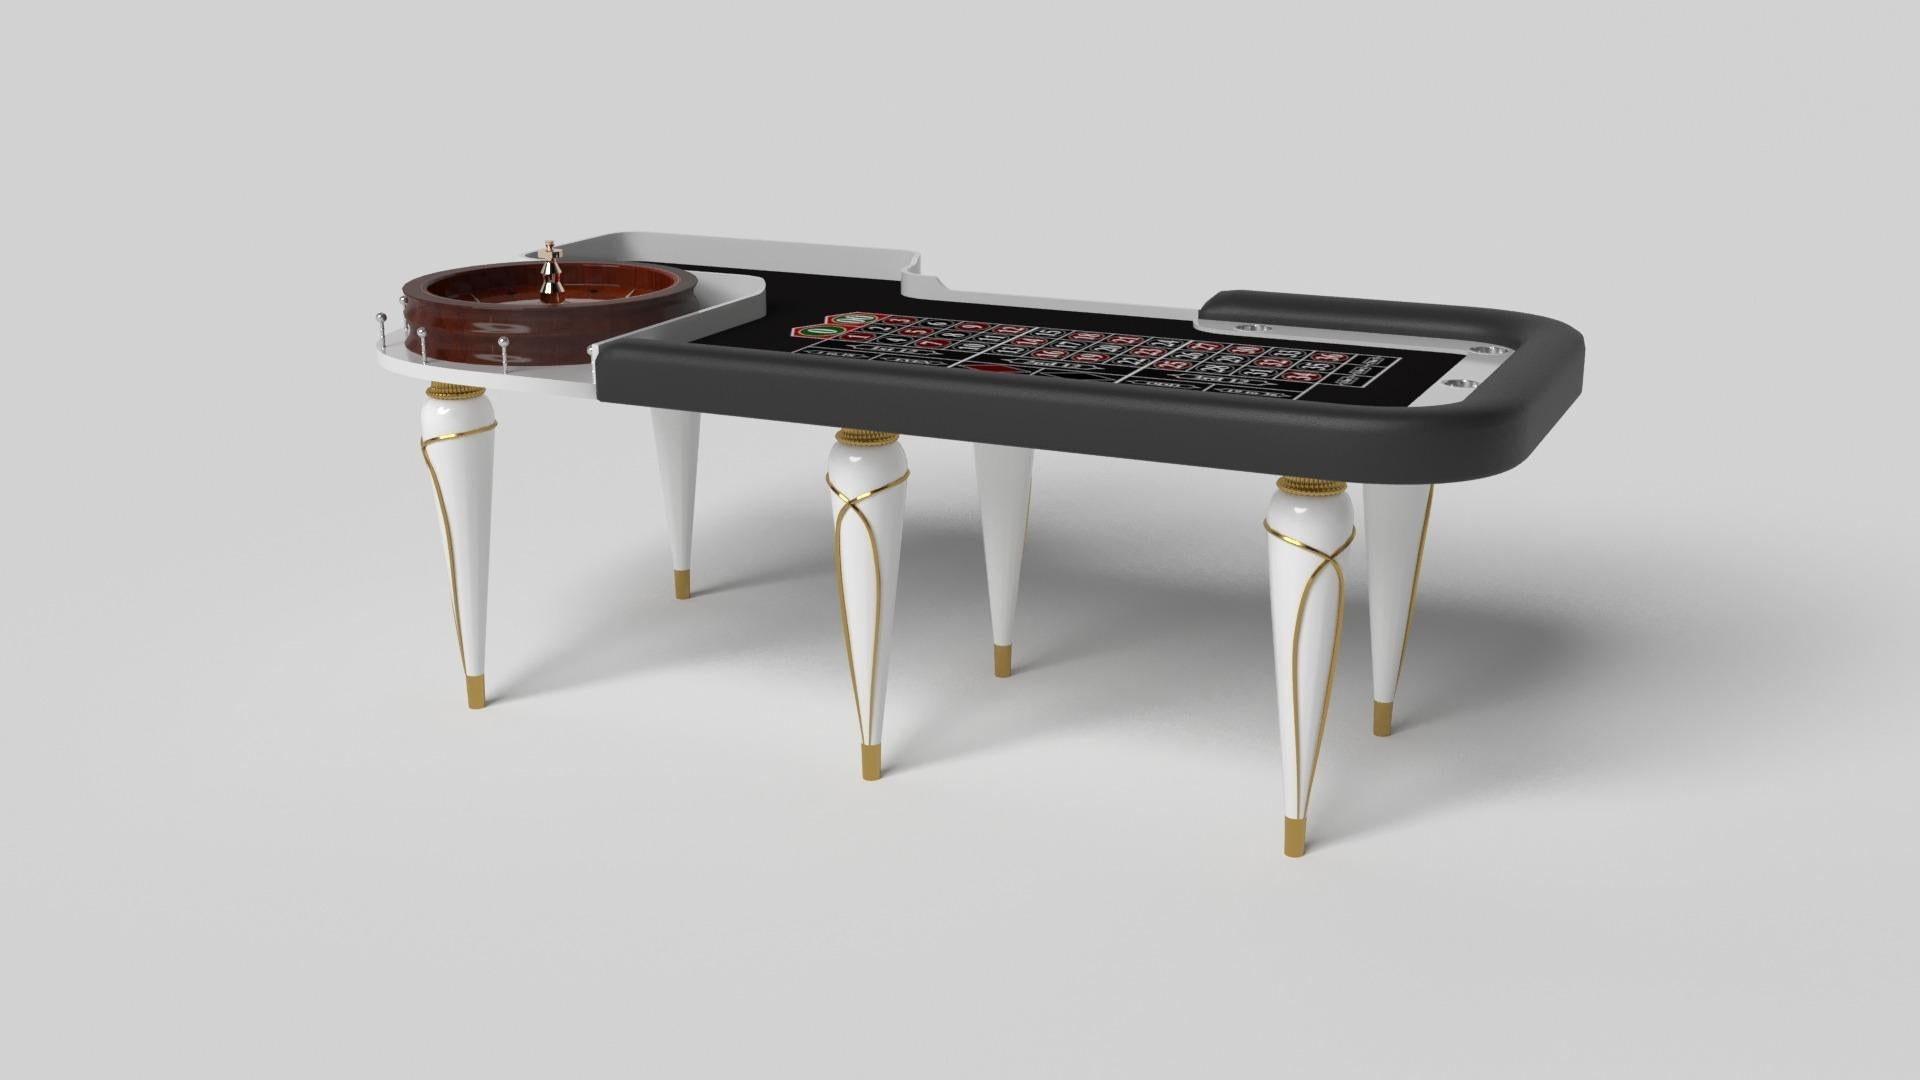 Champagne gold accents add undeniable elegance to this luxury roulette table. Offering superior playability and uncompromised style, this design features hand carved details, decorative metal elements, and metal sabots at the bottom of each leg. The